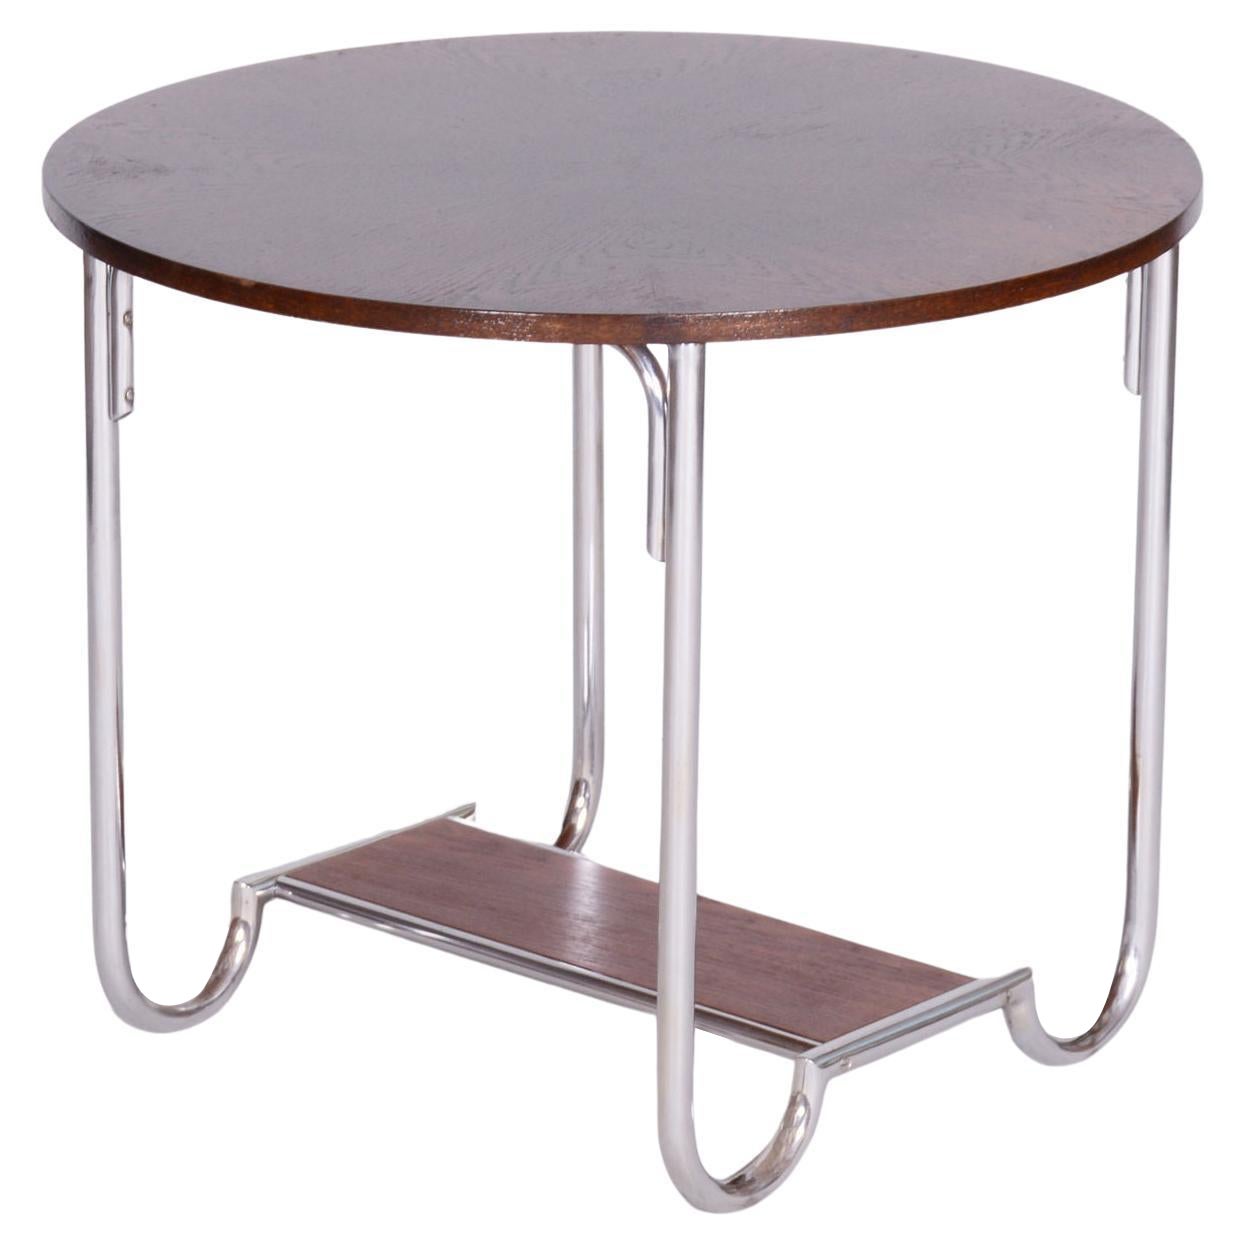 Restored Bauhaus Oak Small Round Table, Chrome-Plated Steel, Czechia, 1930s For Sale